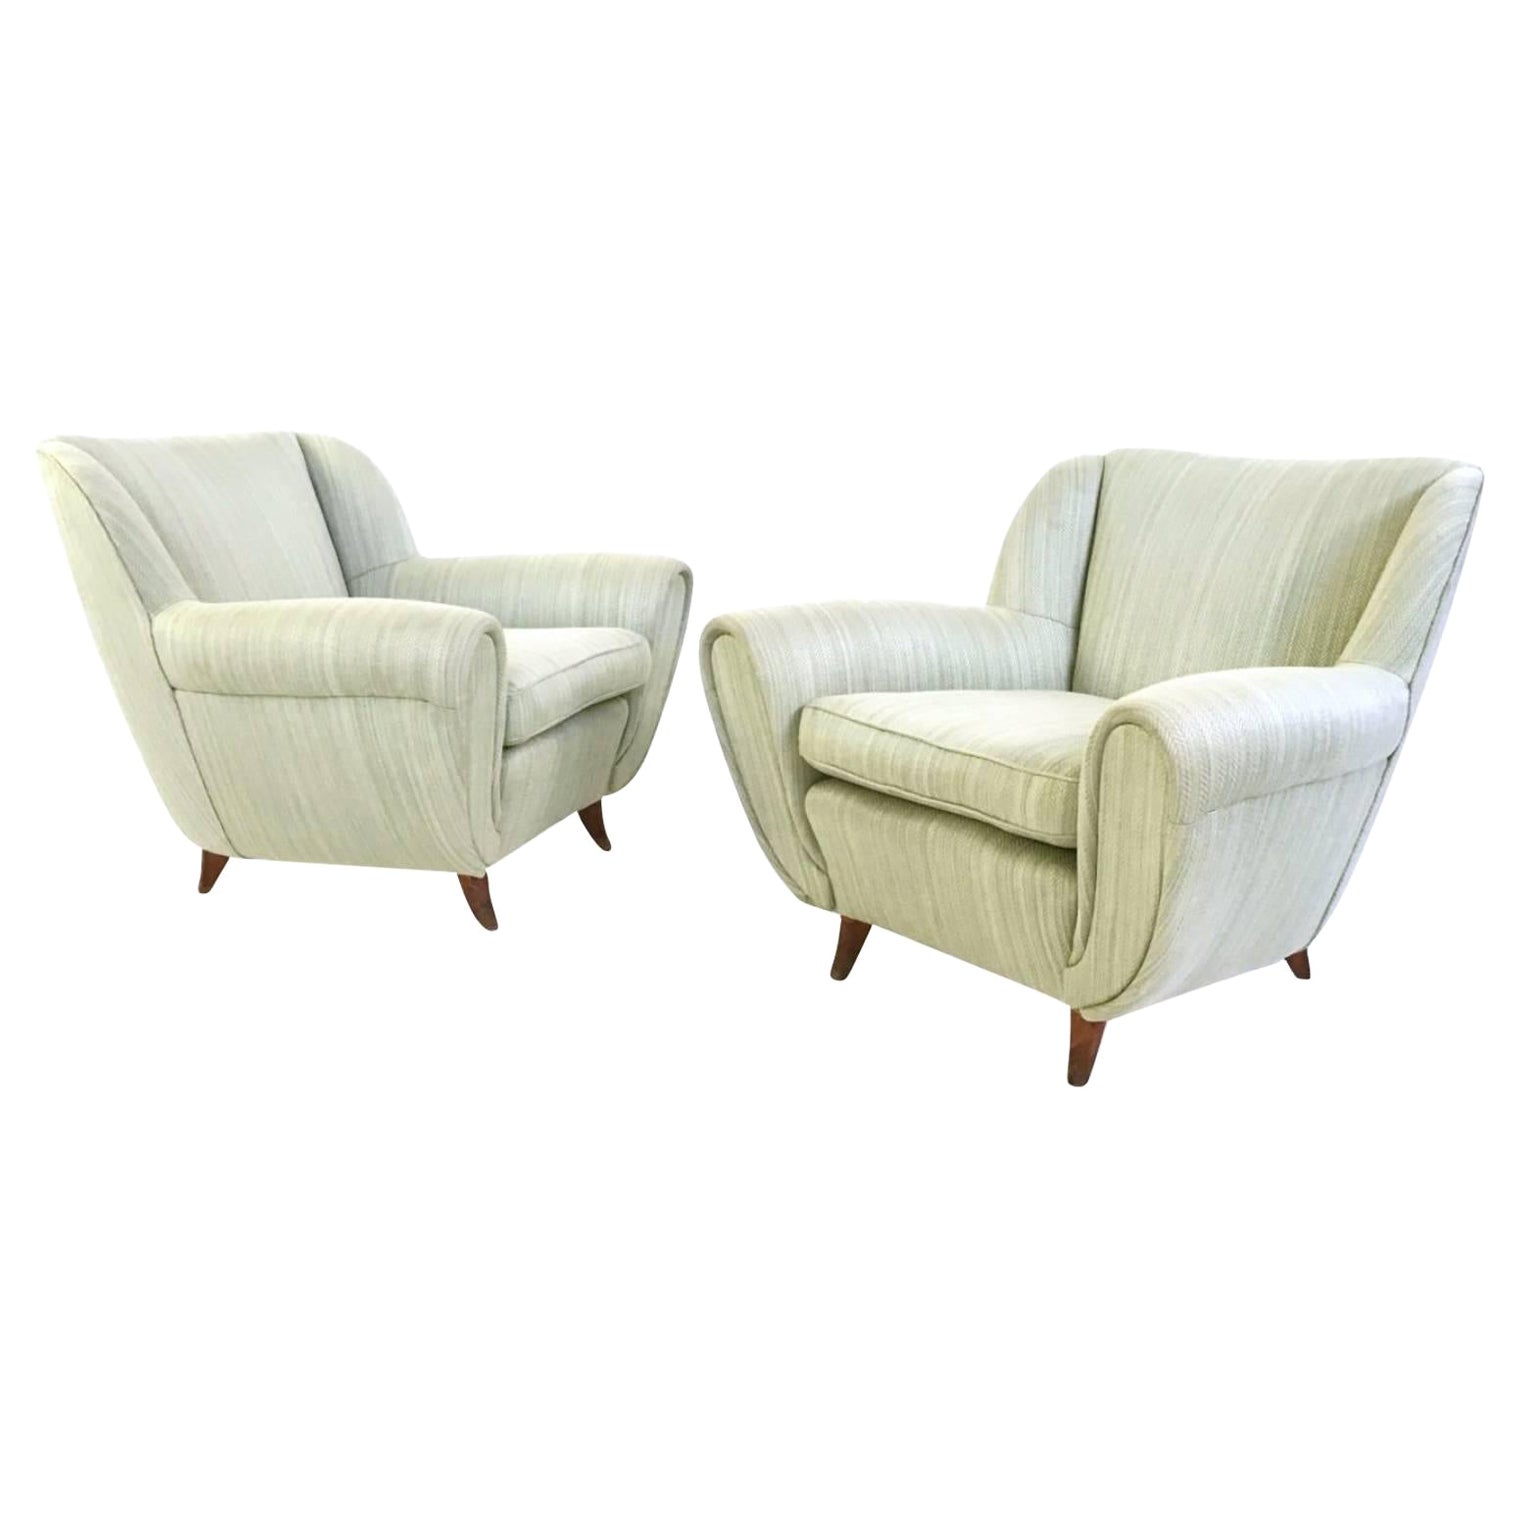 Pair of Vintage Light Green Armchairs with Wooden Structure, Italy